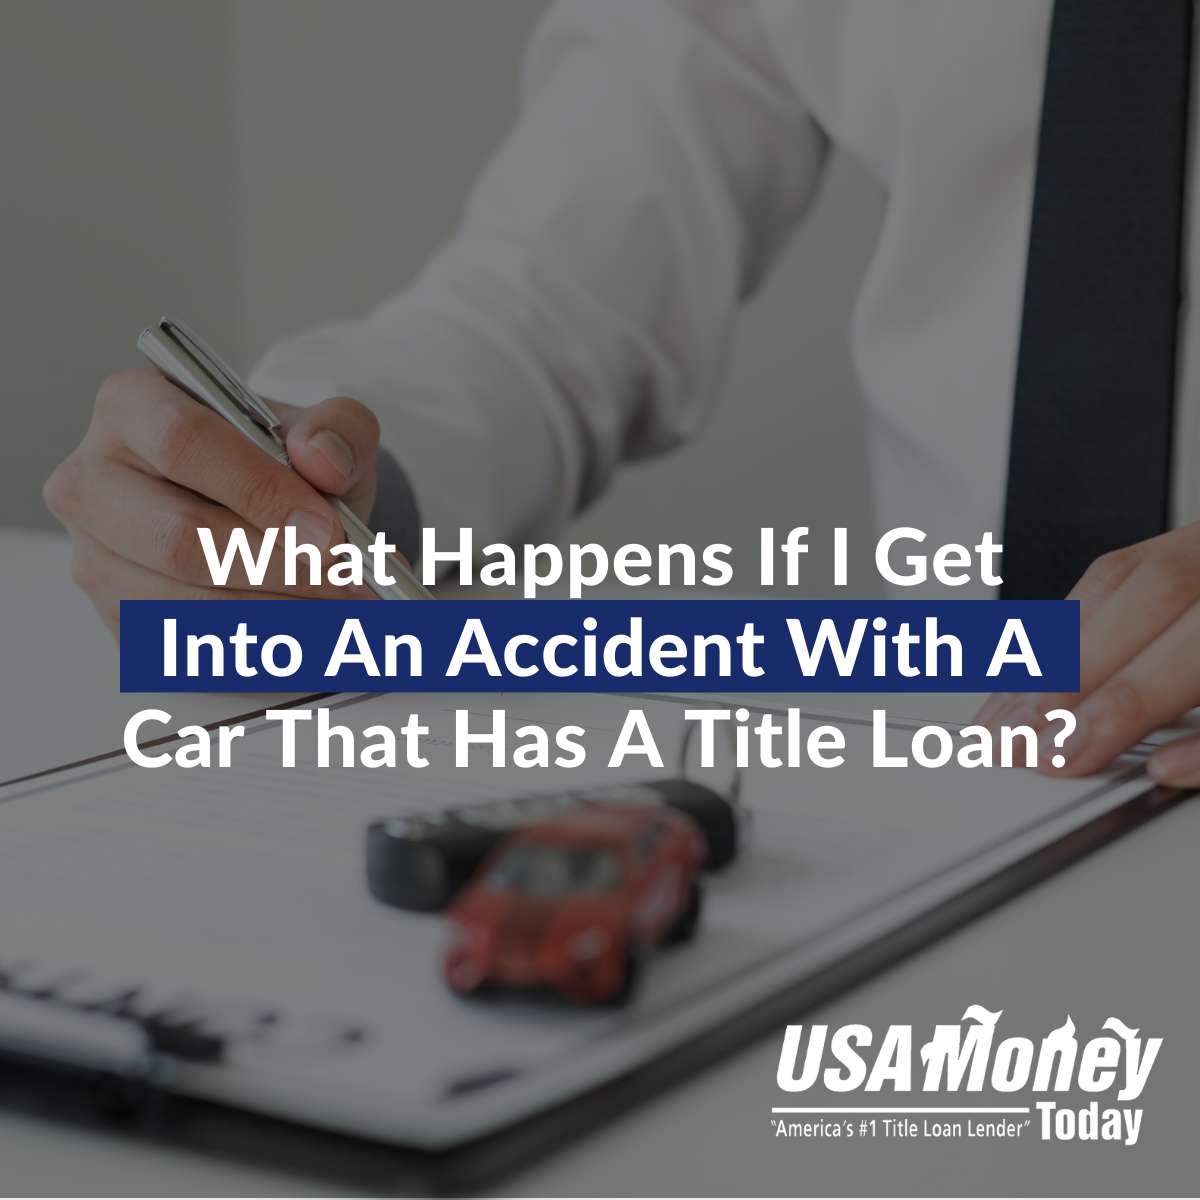 What Happens If I Get Into An Accident With A Car That Has A Title Loan